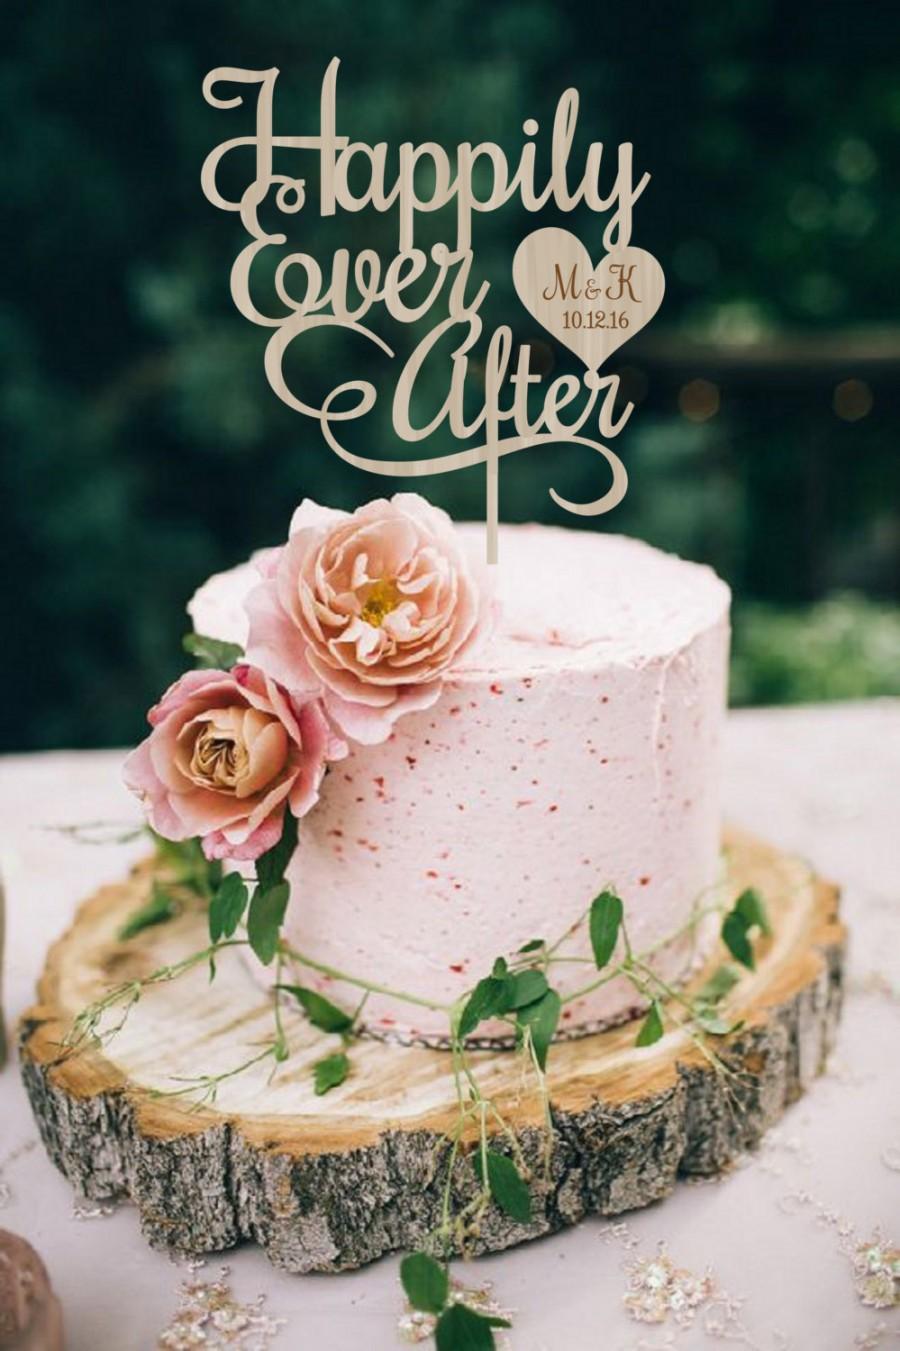 Wedding - Happily Ever After  Wedding Cake Topper Rustic Cake Topper  Personalized  Wood Cake Topper Silver Gold Cake Topper